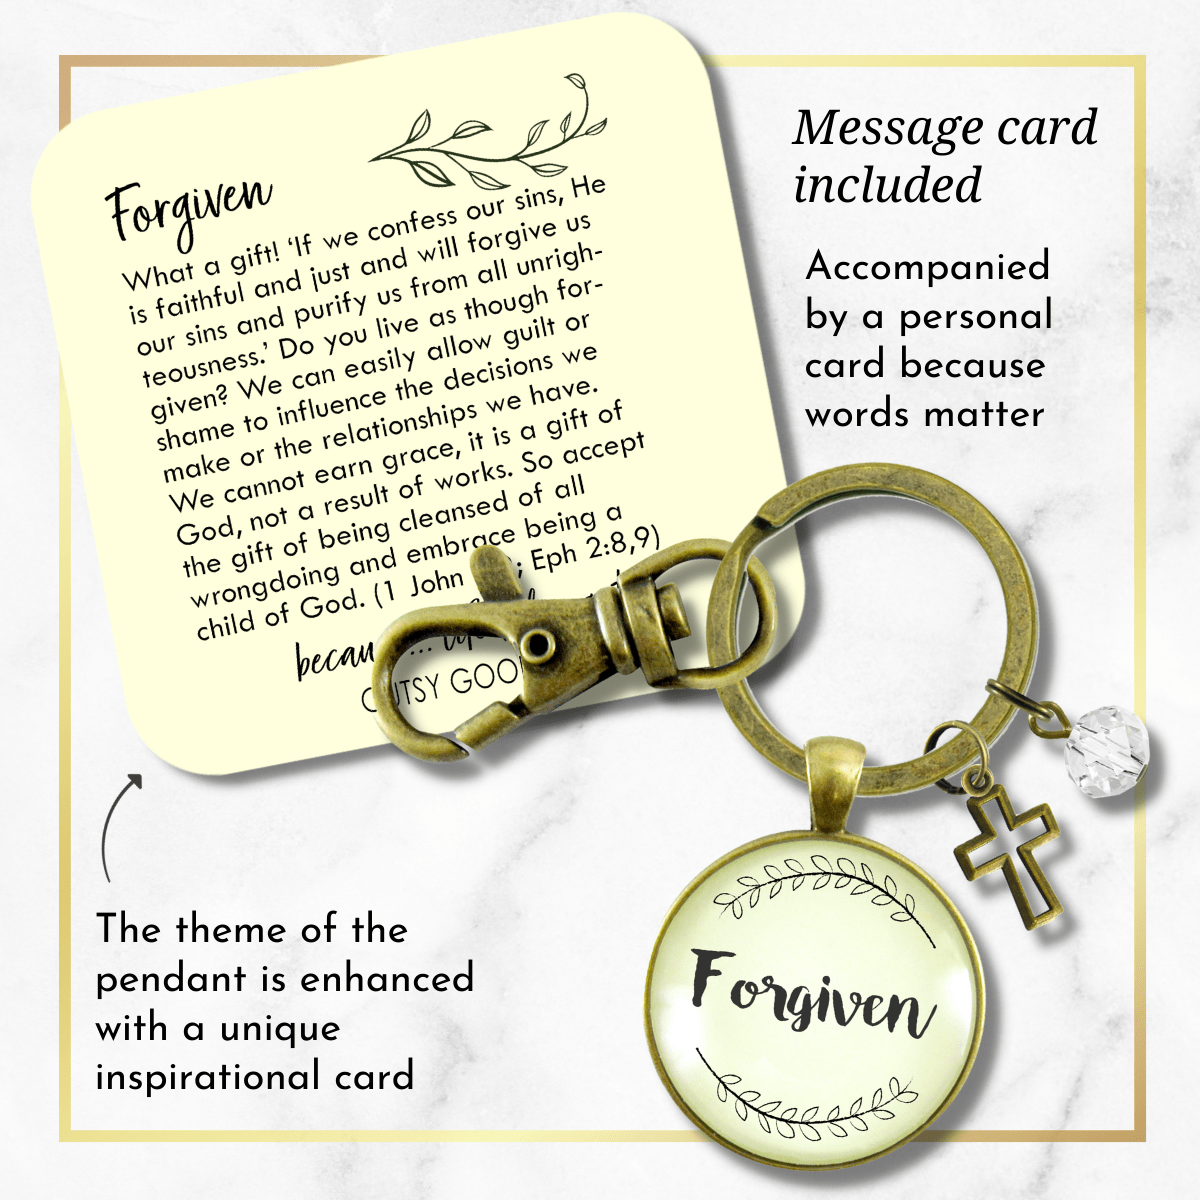 Forgiven Keychain Faith Inspired Christian Women's Jewelry One Word Style Pendant - Gutsy Goodness